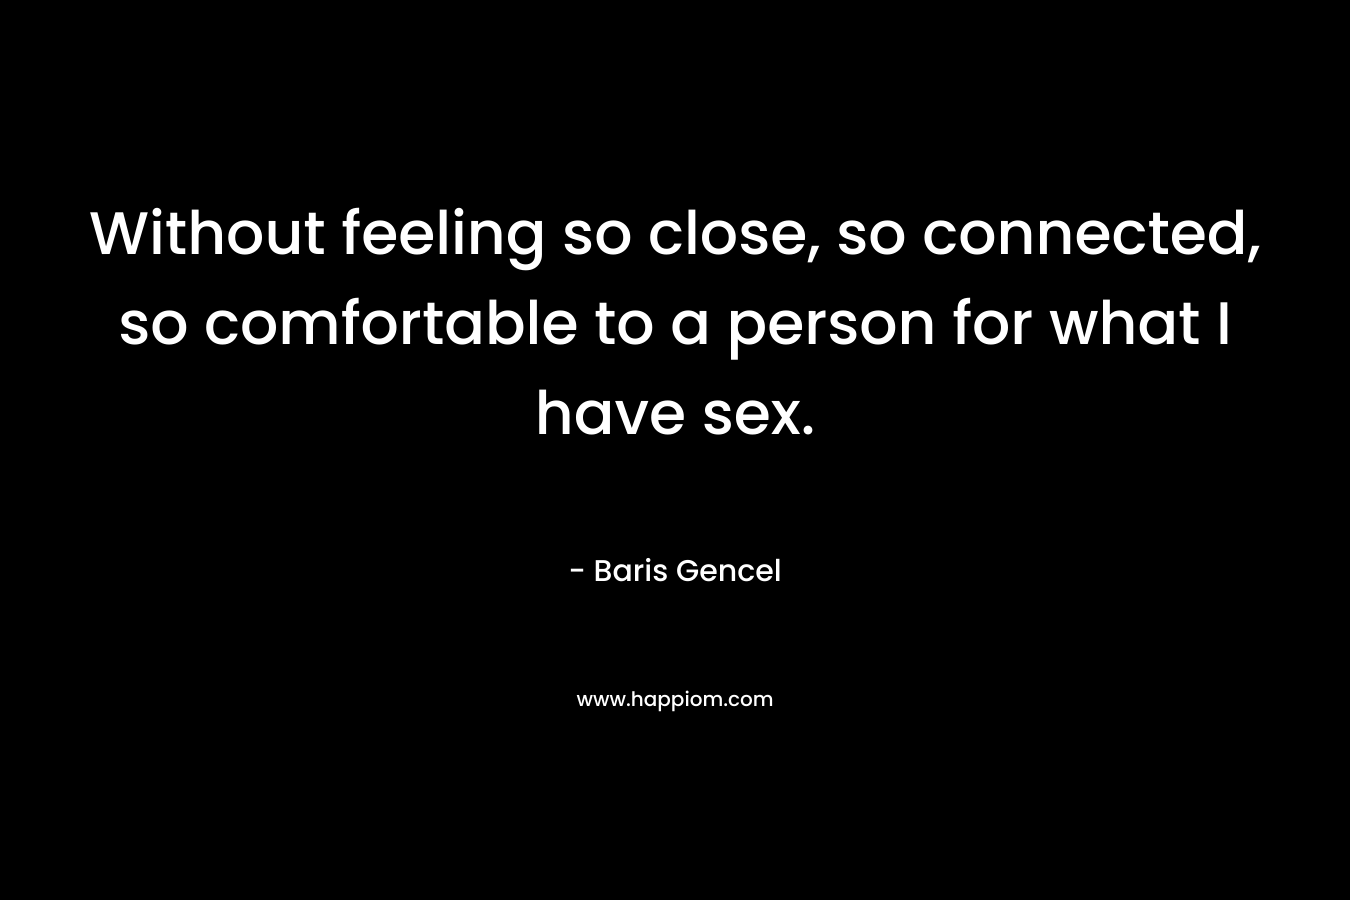 Without feeling so close, so connected, so comfortable to a person for what I have sex.